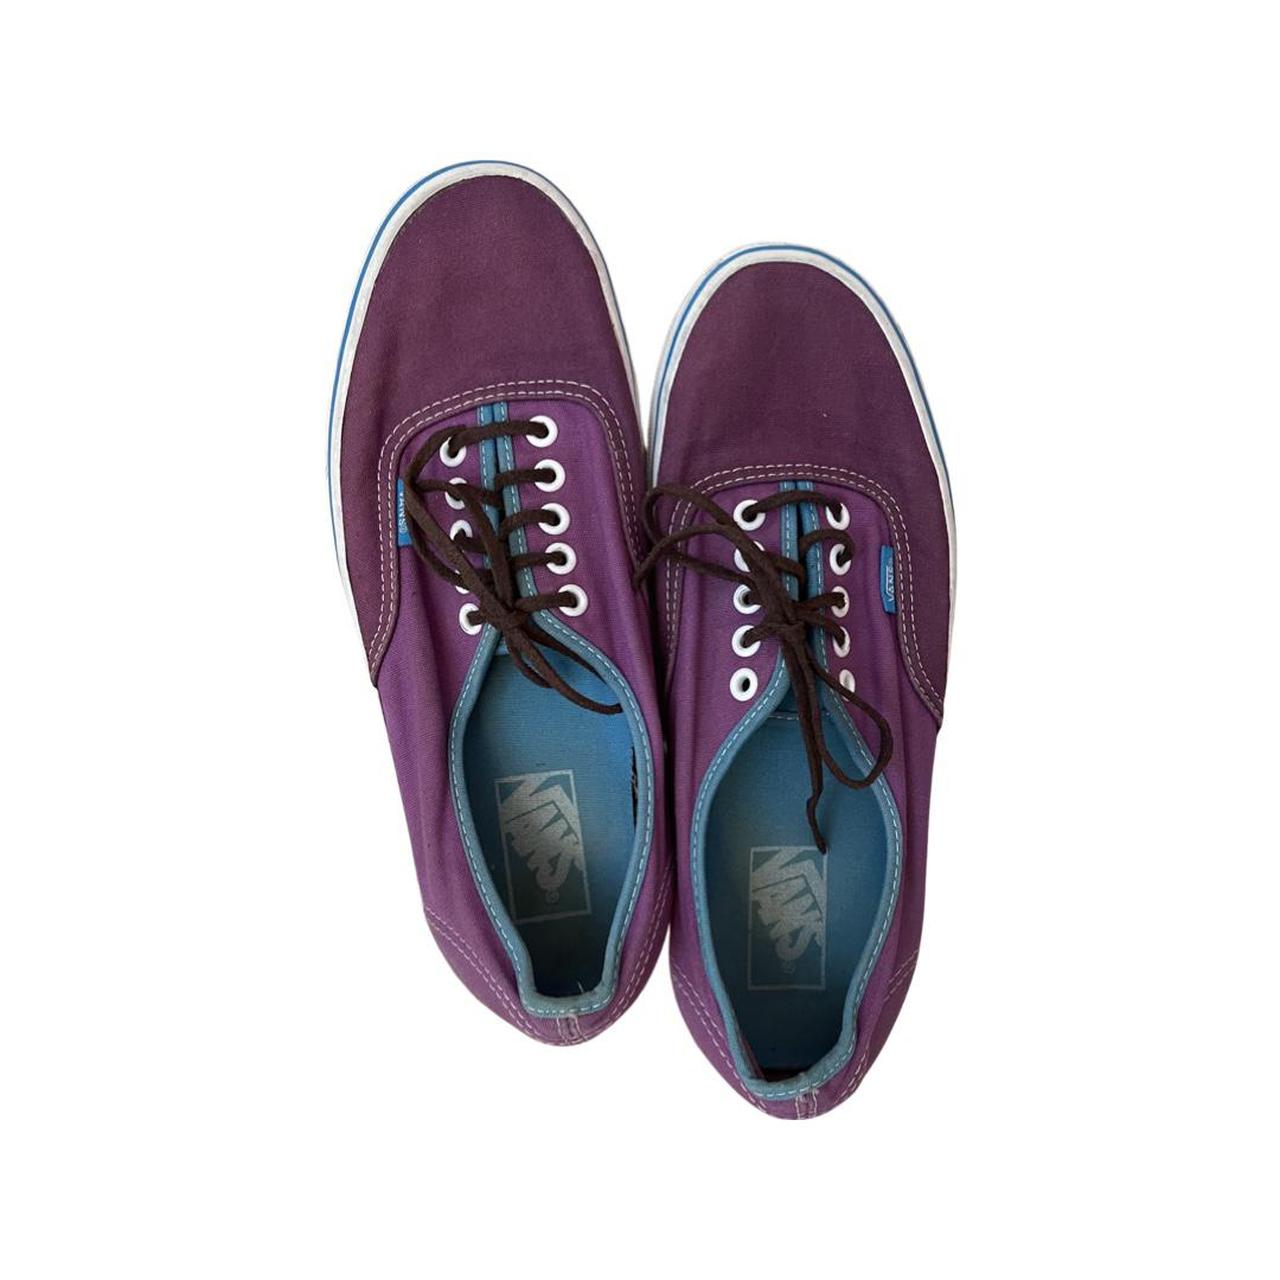 Product Image 1 - retro pair of purple and